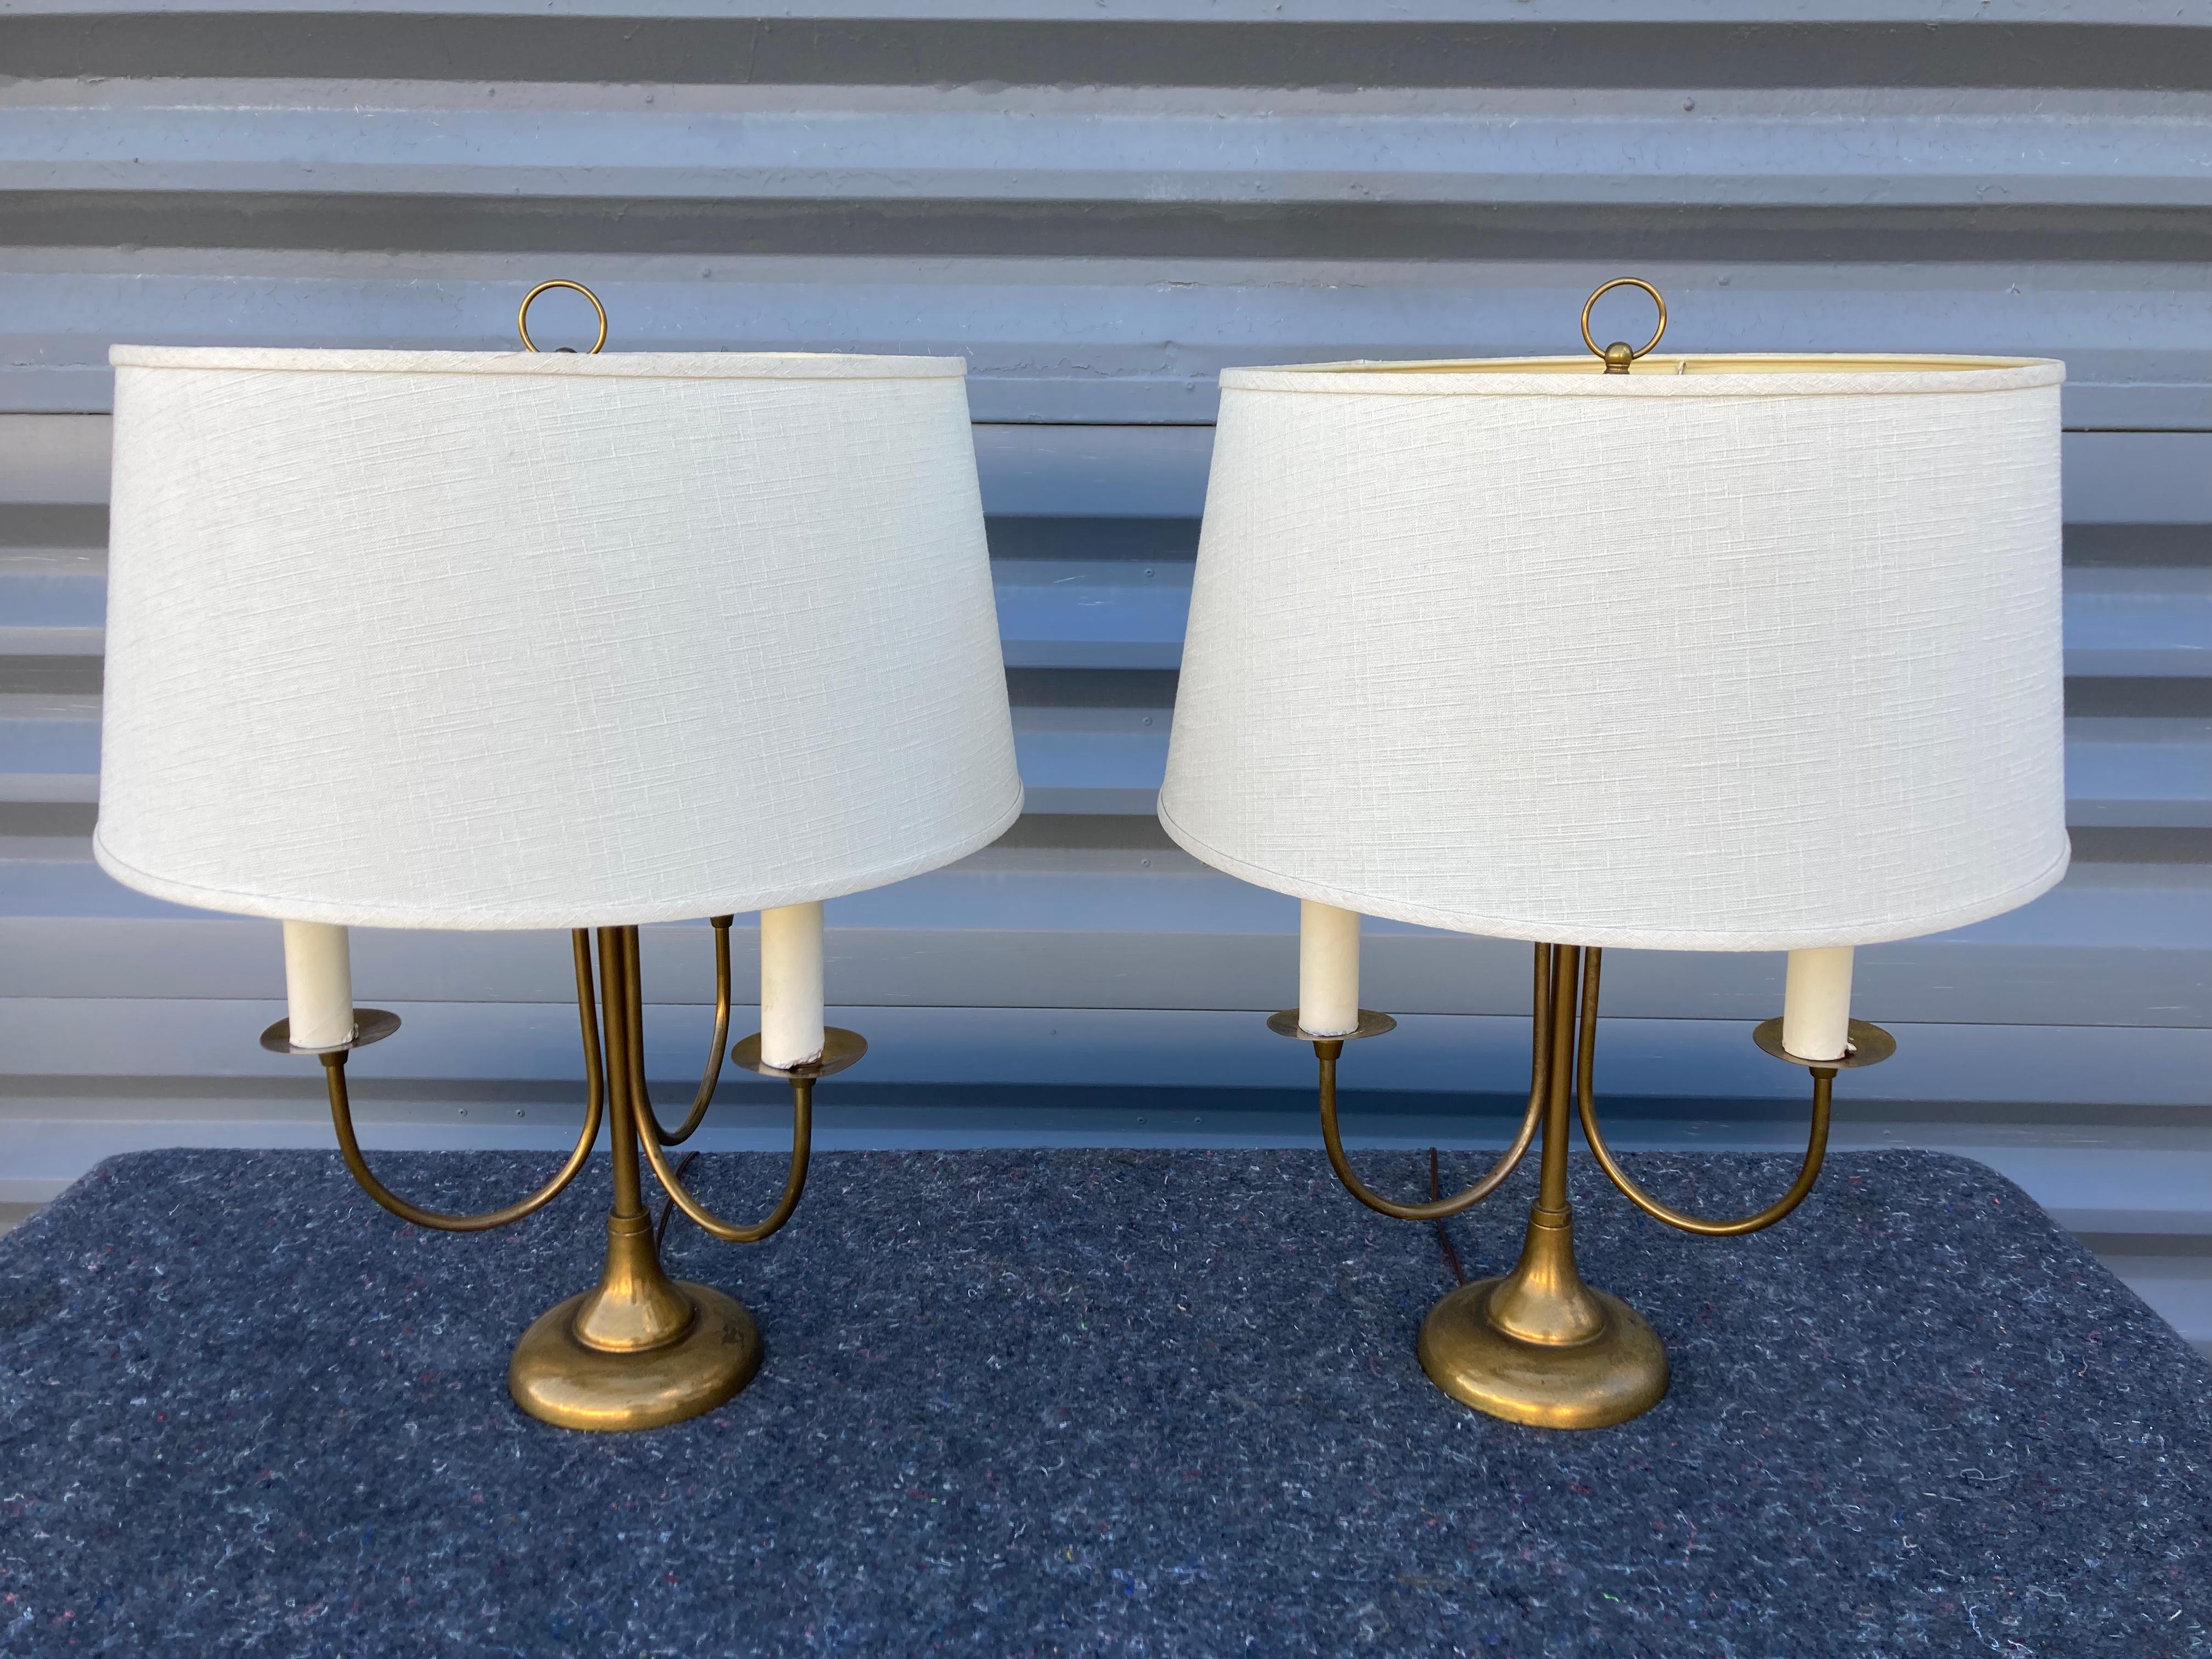 Mid-20th Century Pair of Mid-Century Modern Table Lamps, Brass, USA, 1950s For Sale